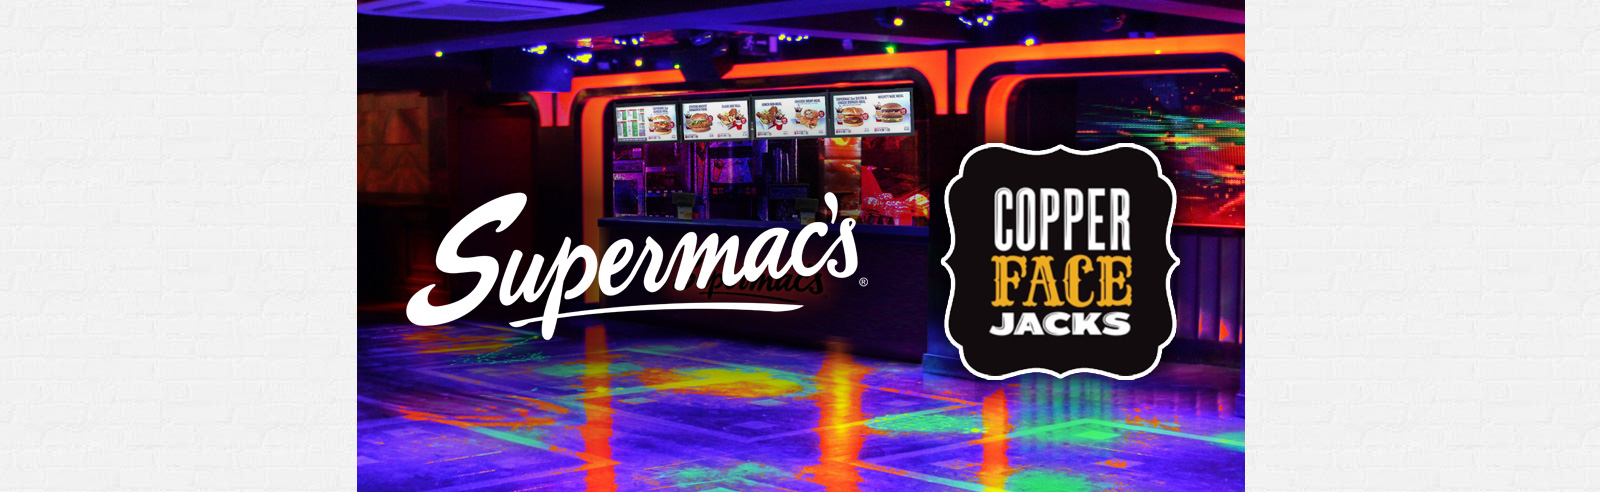 Supermac’s to open branch in Copper Face Jacks